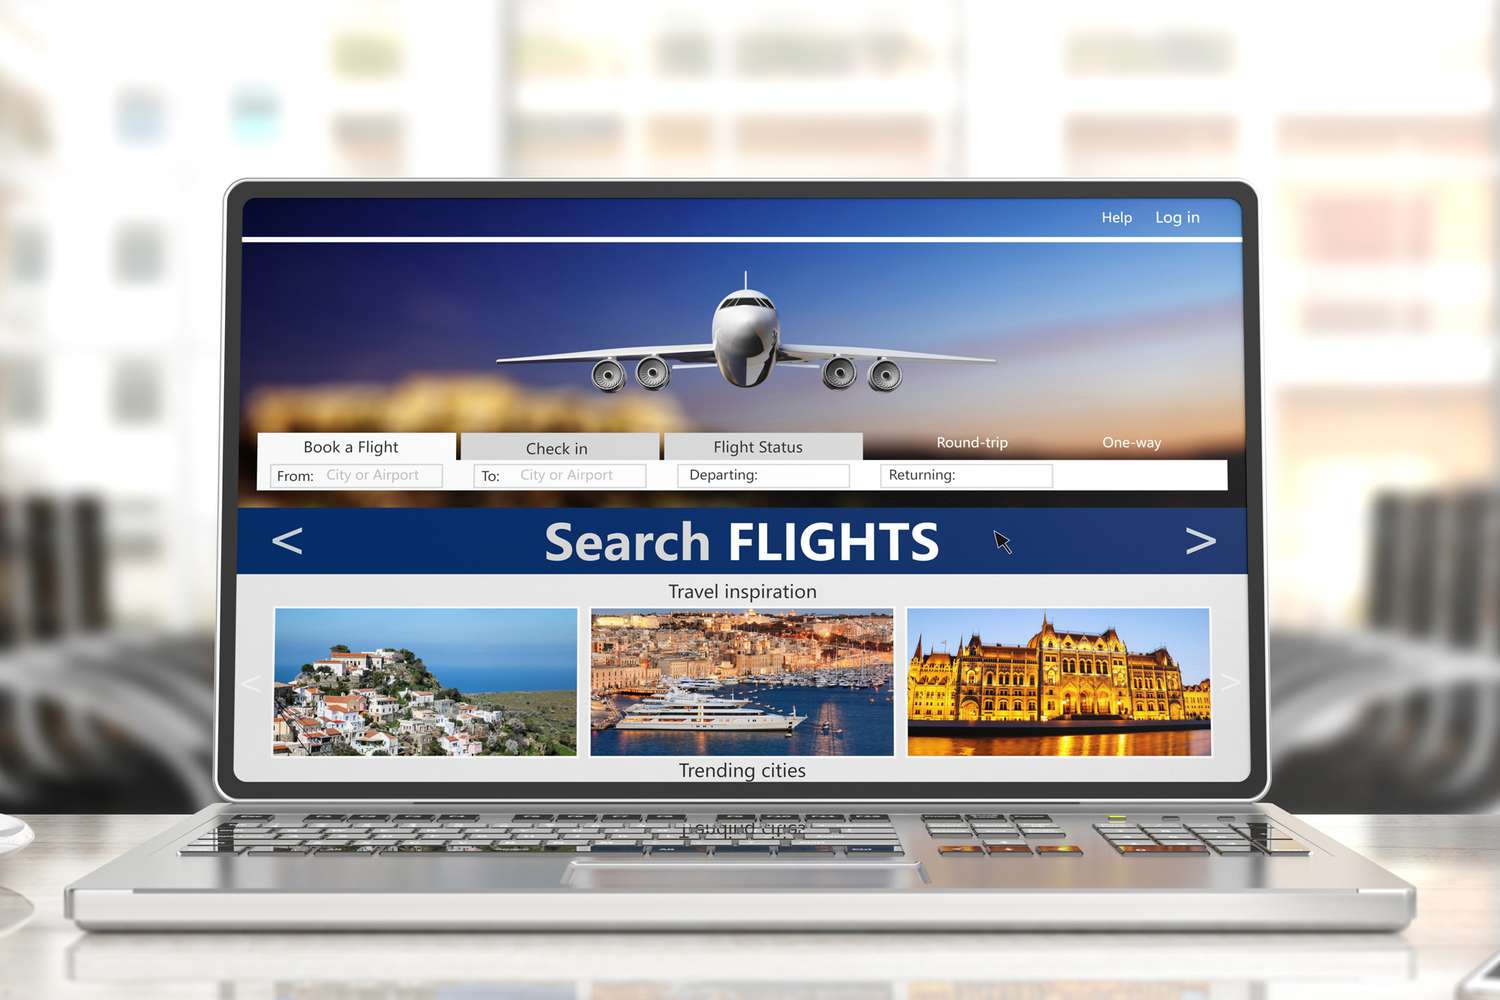 Flights online booking and reservation. Search flights on a computer laptop screen, front view, blur office business background. 3d illustration